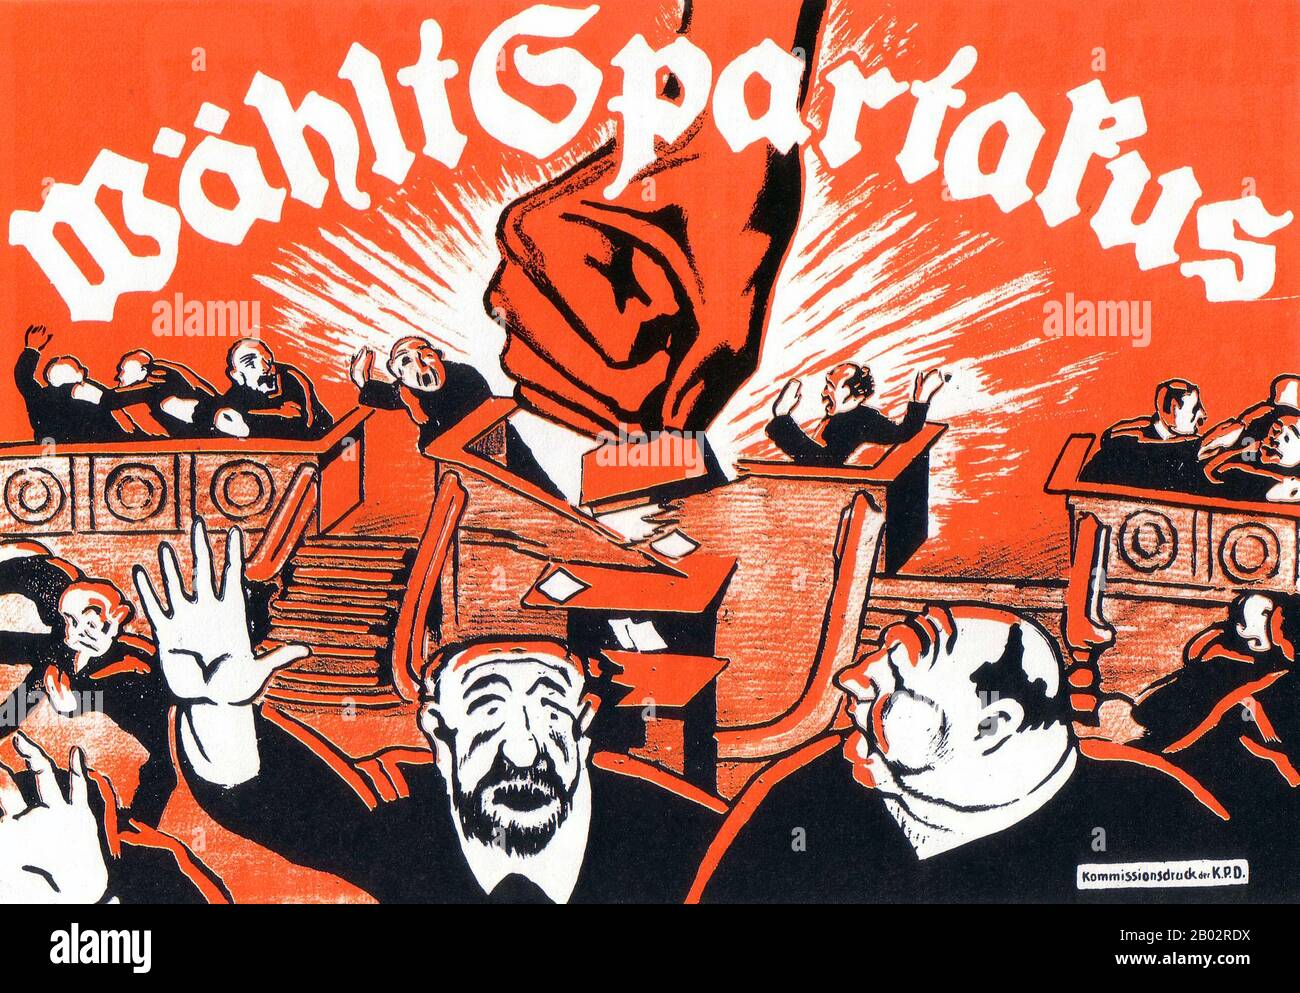 The Spartacus League (German: Spartakusbund) was a Marxist revolutionary movement organized in Germany during World War I. The League was named after Spartacus, leader of the largest slave rebellion of the Roman Republic. It was founded by Karl Liebknecht, Rosa Luxemburg, Clara Zetkin, and others.  The League subsequently renamed itself the Kommunistische Partei Deutschlands (KPD), joining the Comintern in 1919. Its period of greatest activity was during the German Revolution of 1918, when it sought to incite a revolution by circulating the newspaper Spartacus Letters. Stock Photo